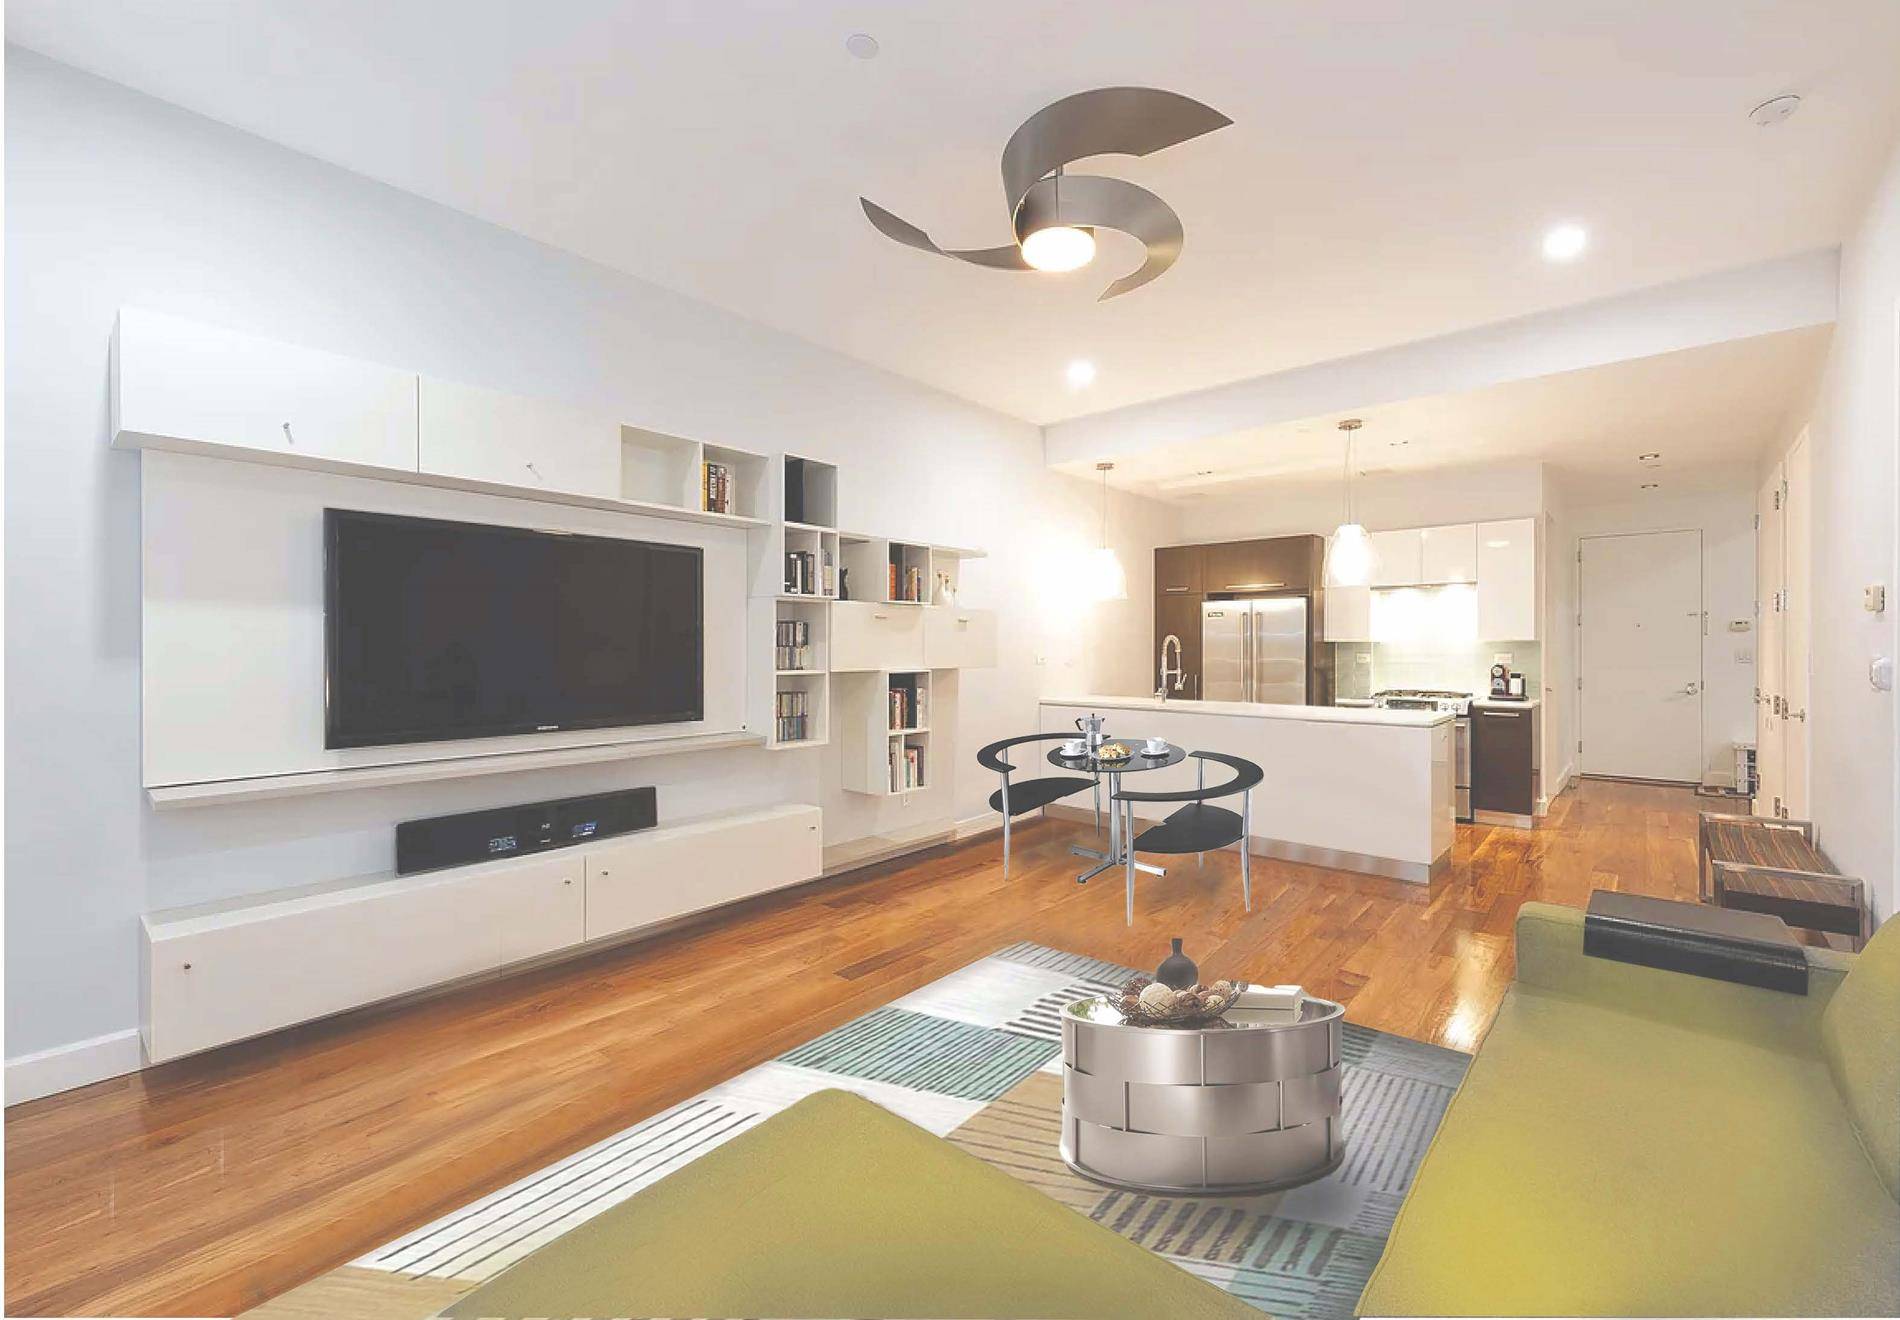 SUPERB amp ; CUSTOMIZED 1 BED w FLEX 2nd BR 2 BA at POWERHOUSE WATERFRONT ADJ.